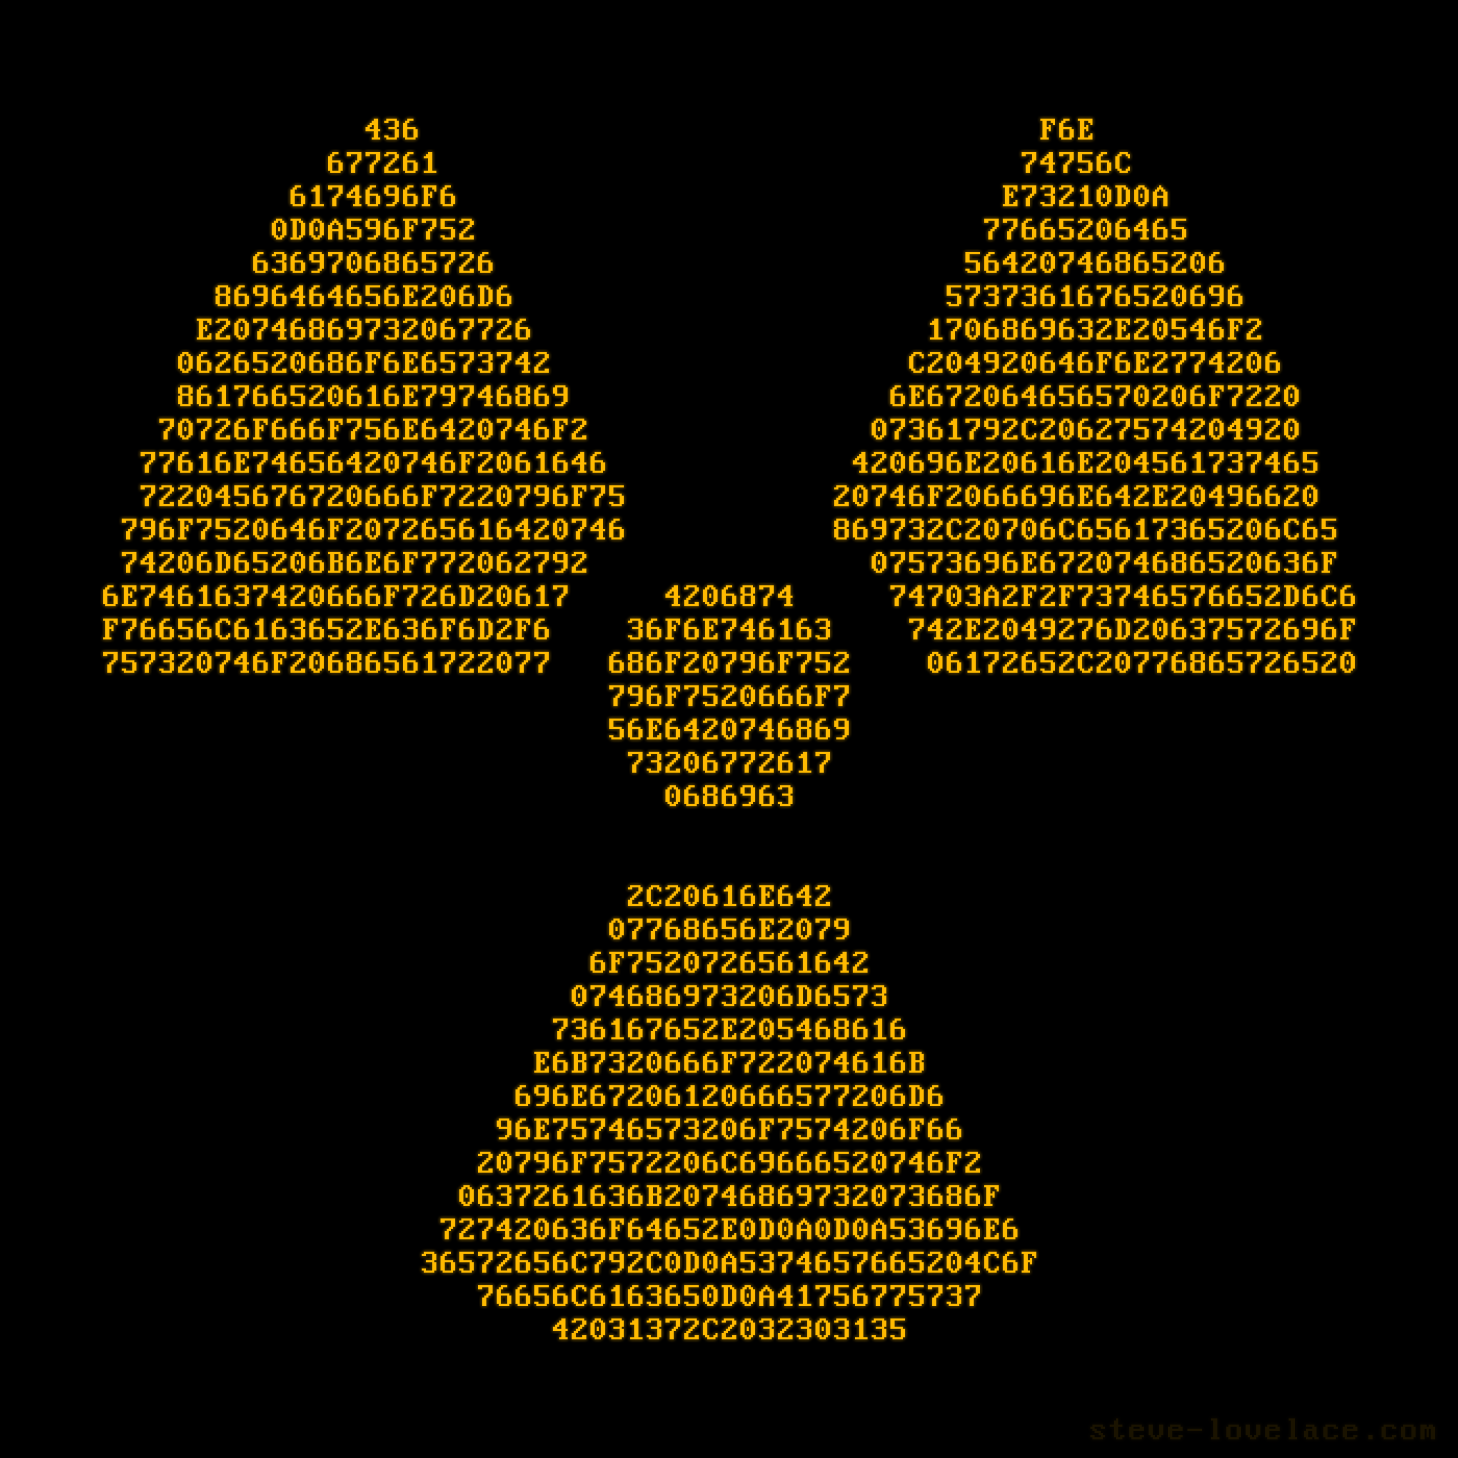 Cool Radioactive Logo - Pictures of Cool Nuclear Radiation Symbol - kidskunst.info